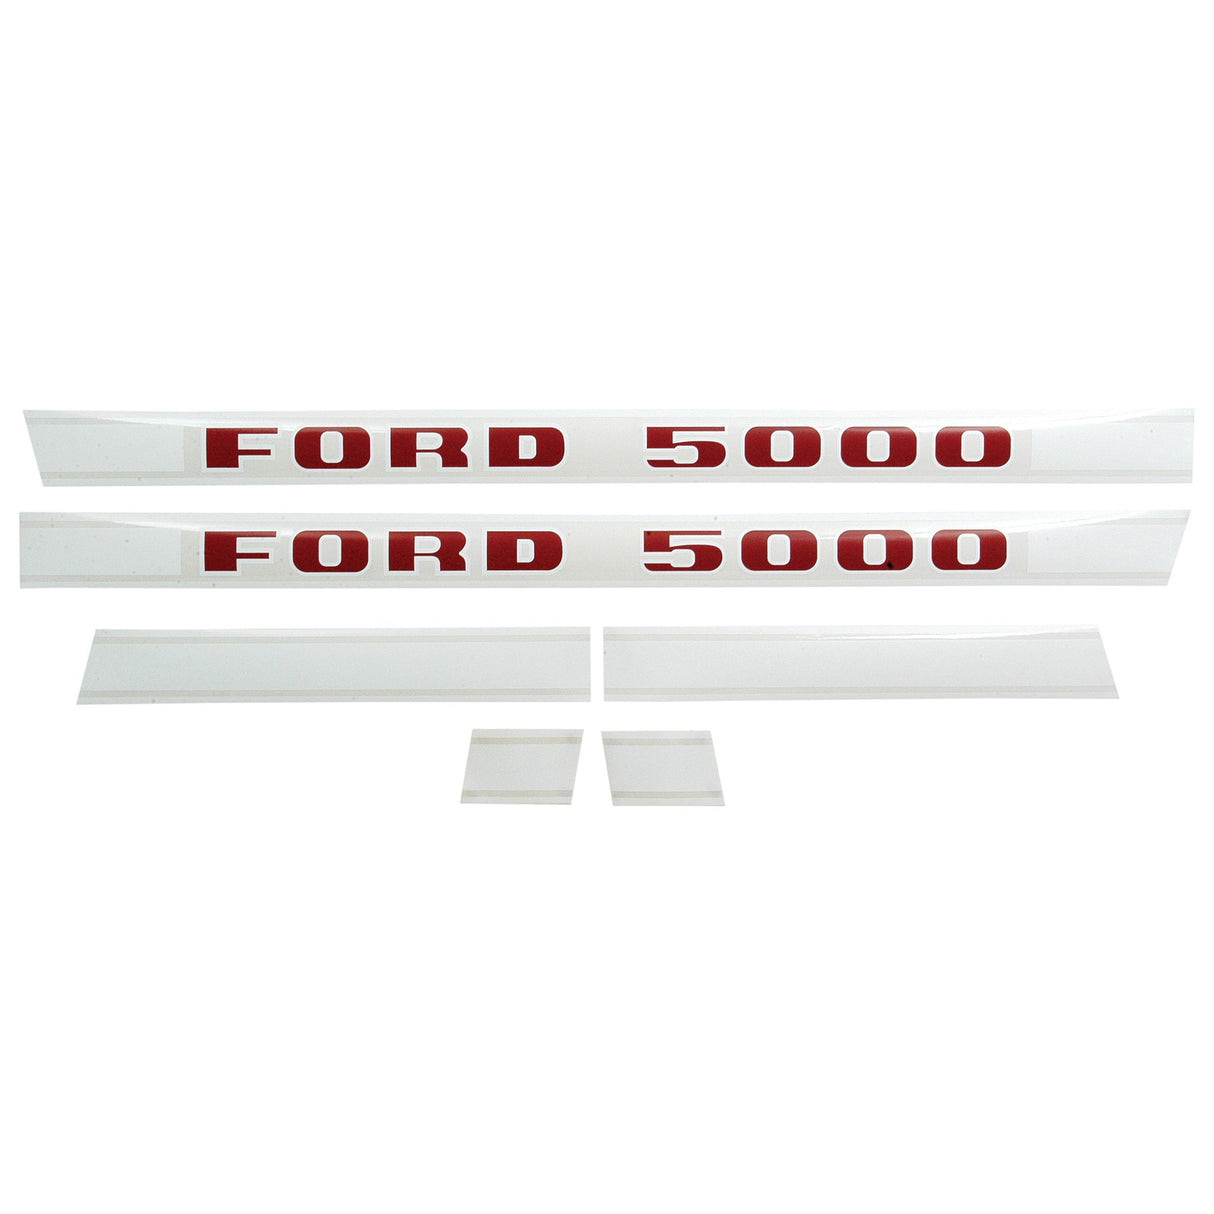 Decal Set - Ford / New Holland 5000
 - S.8412 - Farming Parts